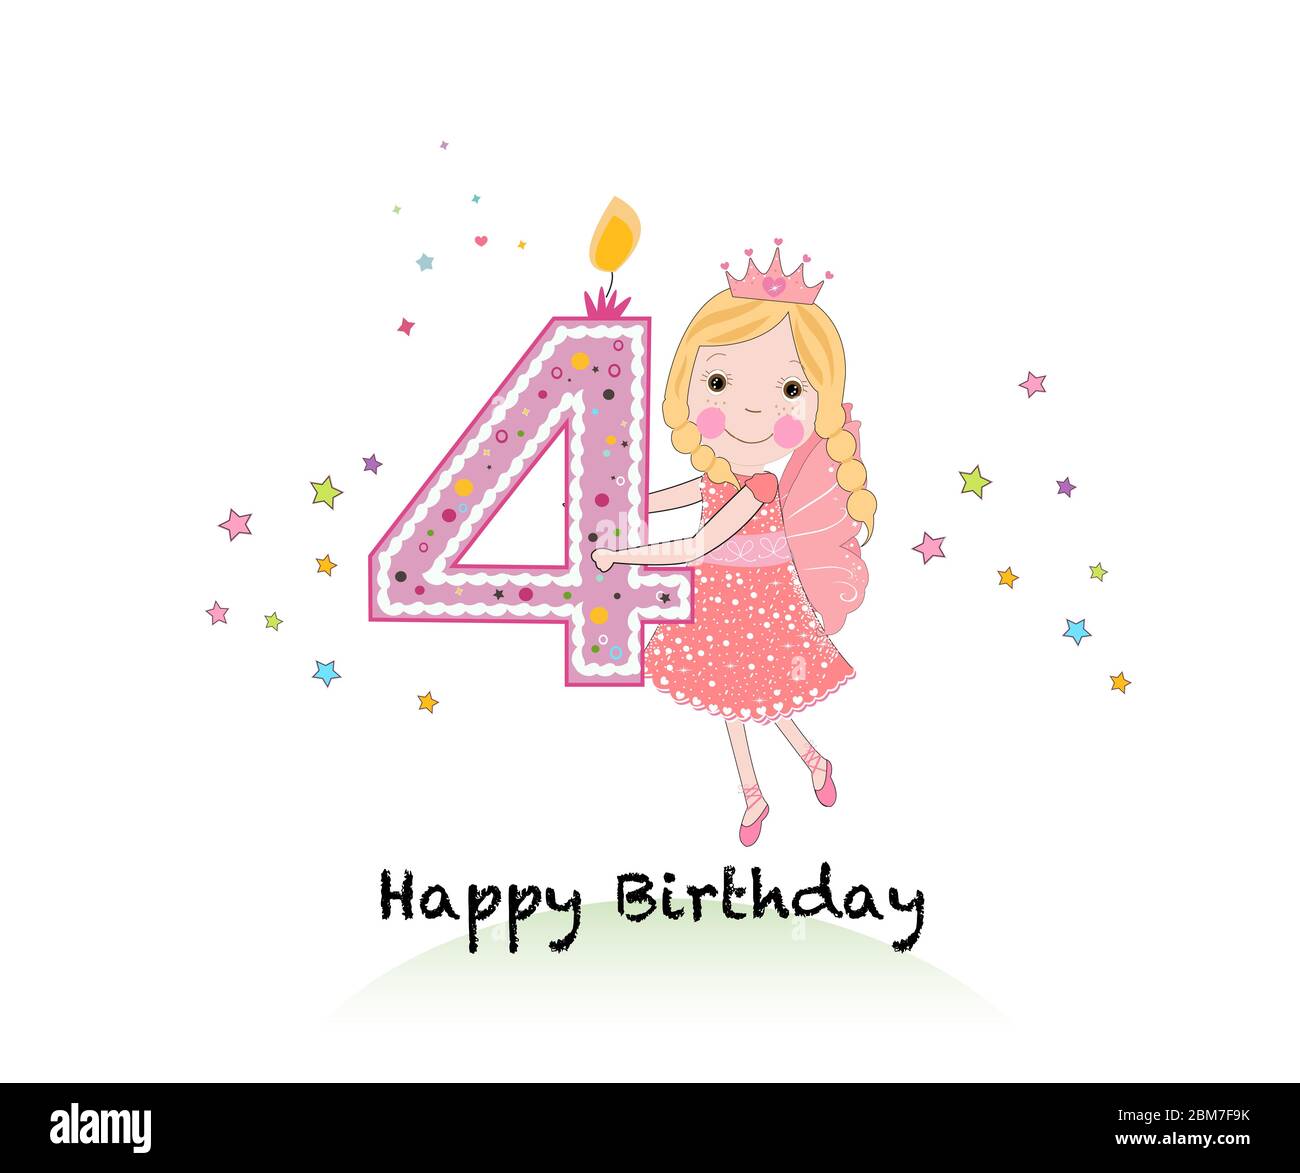 Happy fourth birthday candle. Girl greeting card with cute fairy tale ...